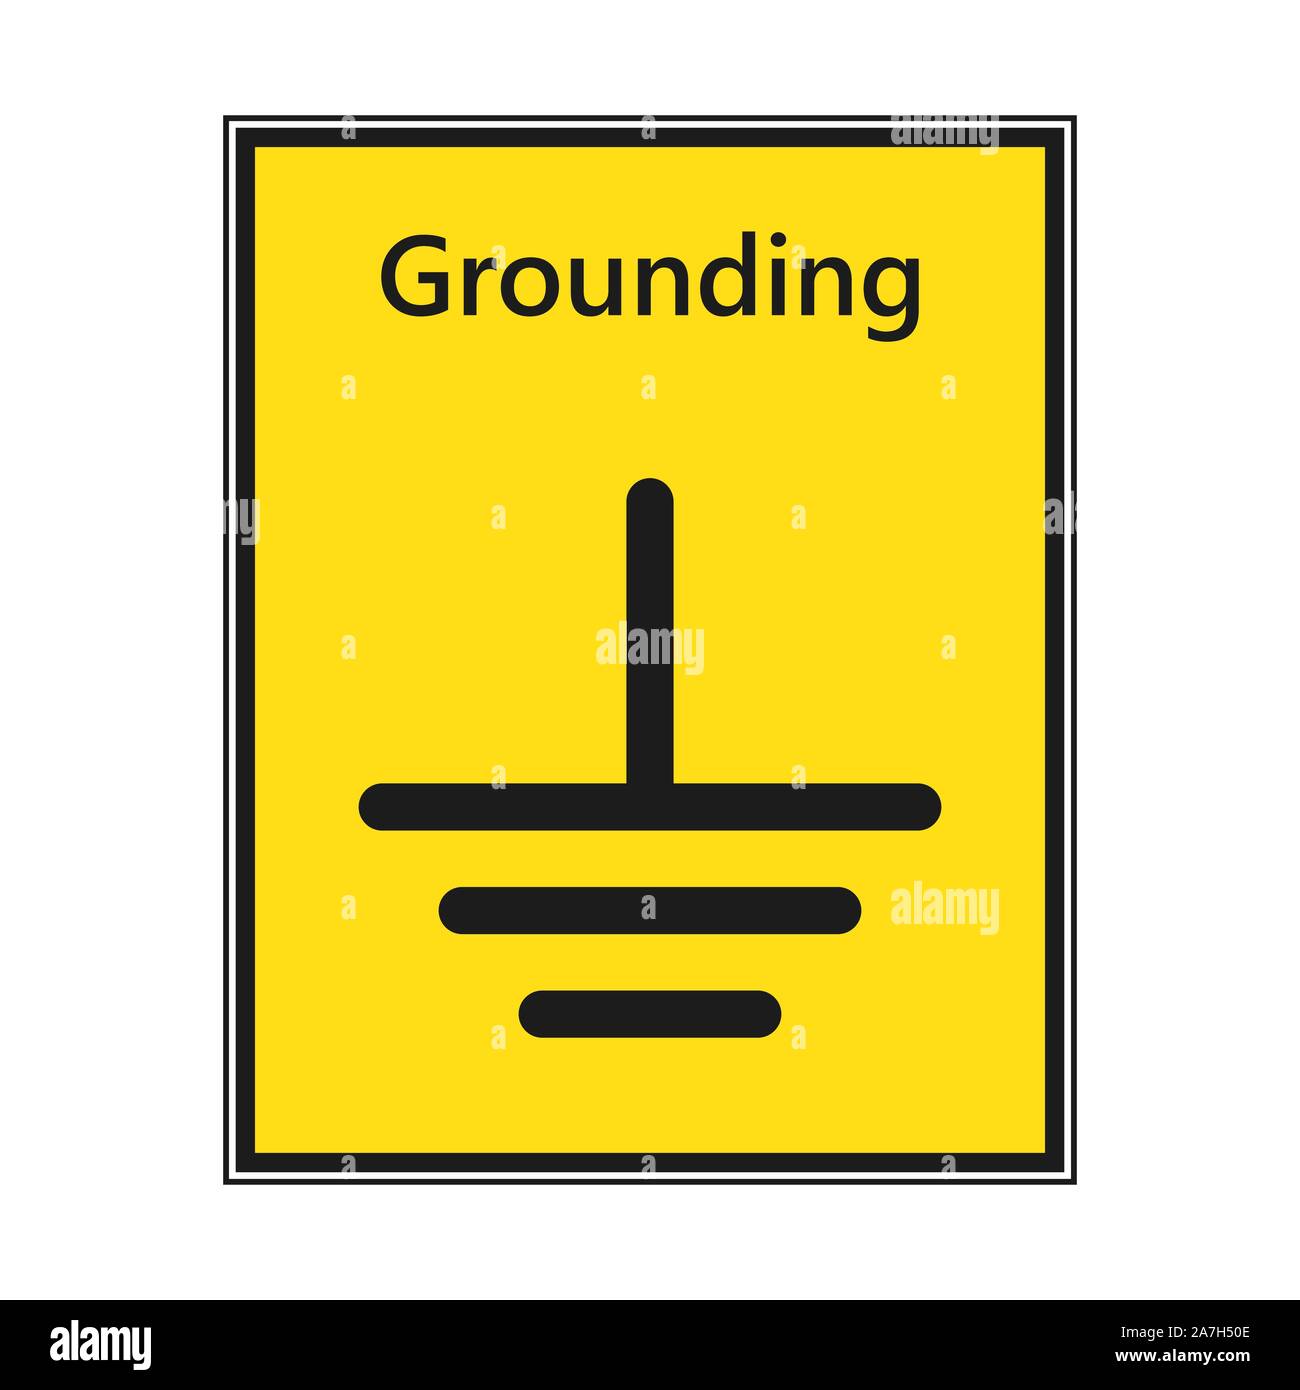 Electrical grounding symbol - vector. Grounding icon isolated. Vector black icon. Protective Earth ground sign in flat design Stock Vector